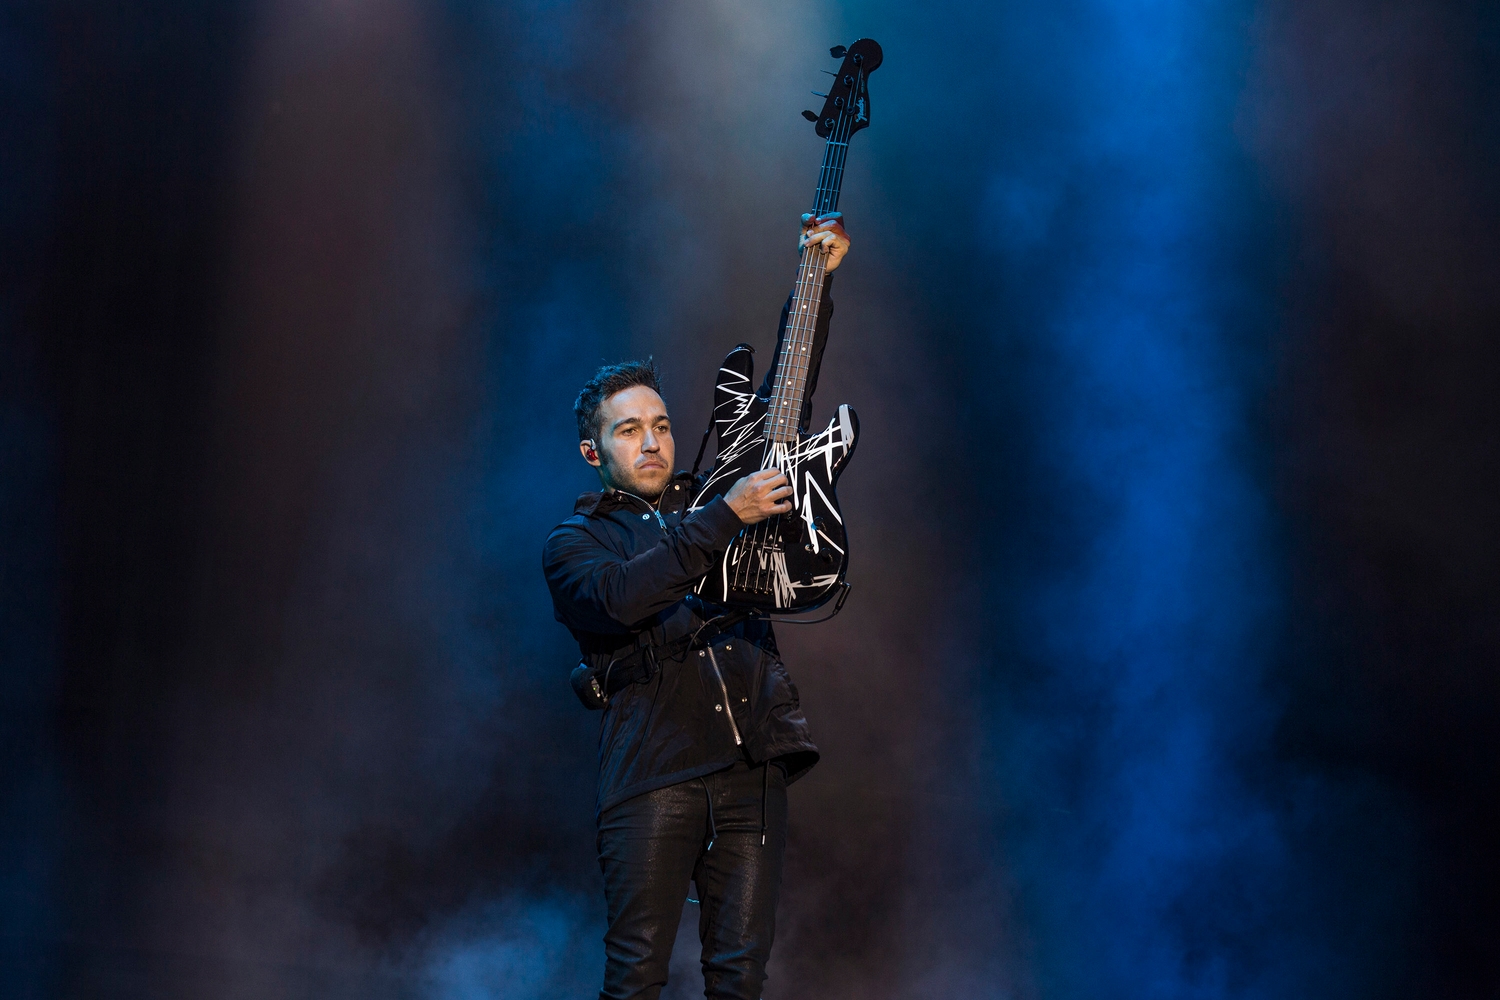 Fall Out Boy light it up for Reading 2016 co-headline set